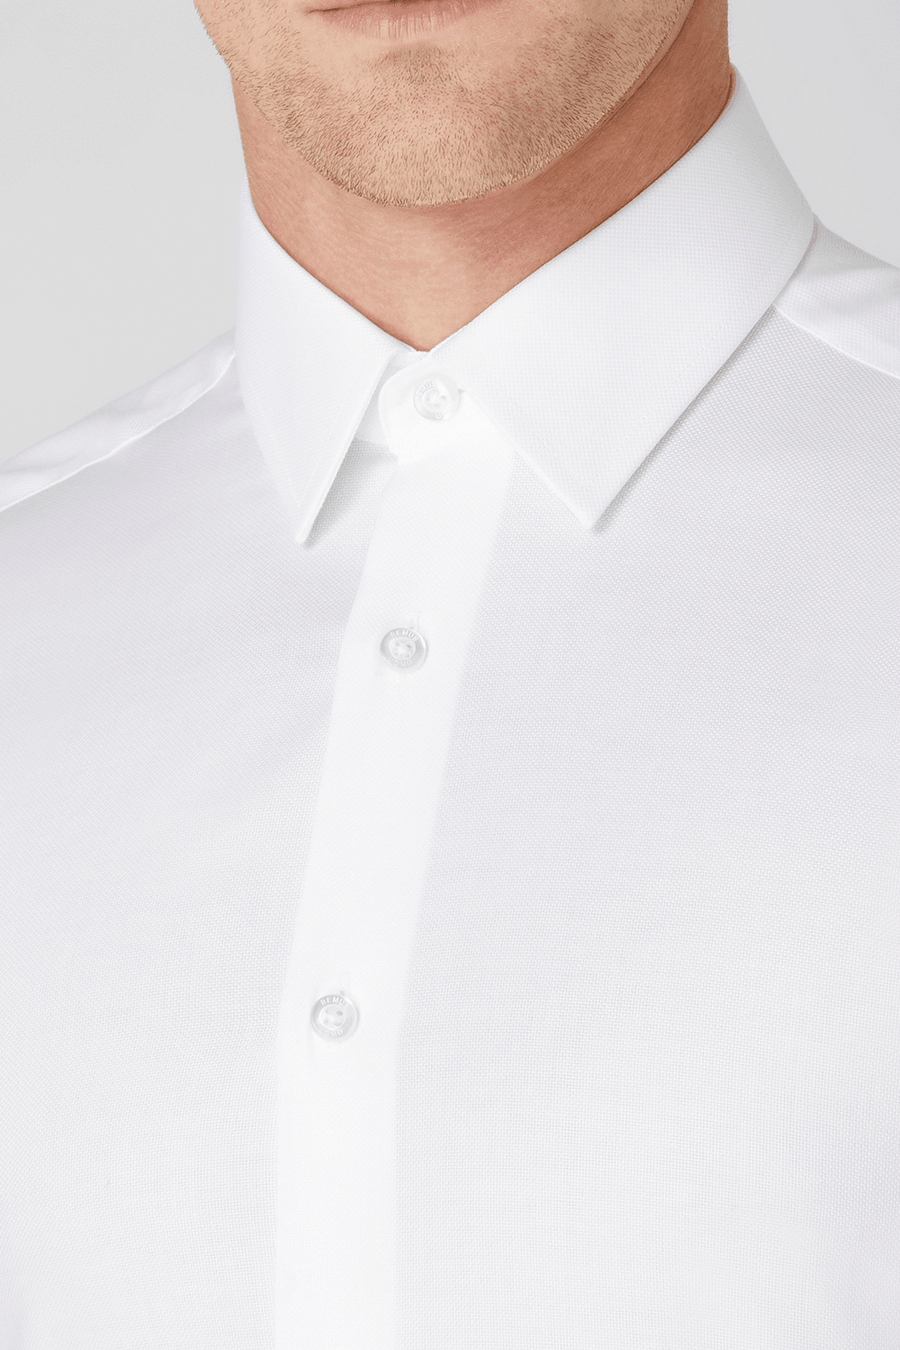 Buy the Remus Uomo Rome/F Ashton Shirt in White at Intro. Spend £50 for free UK delivery. Official stockists. We ship worldwide.